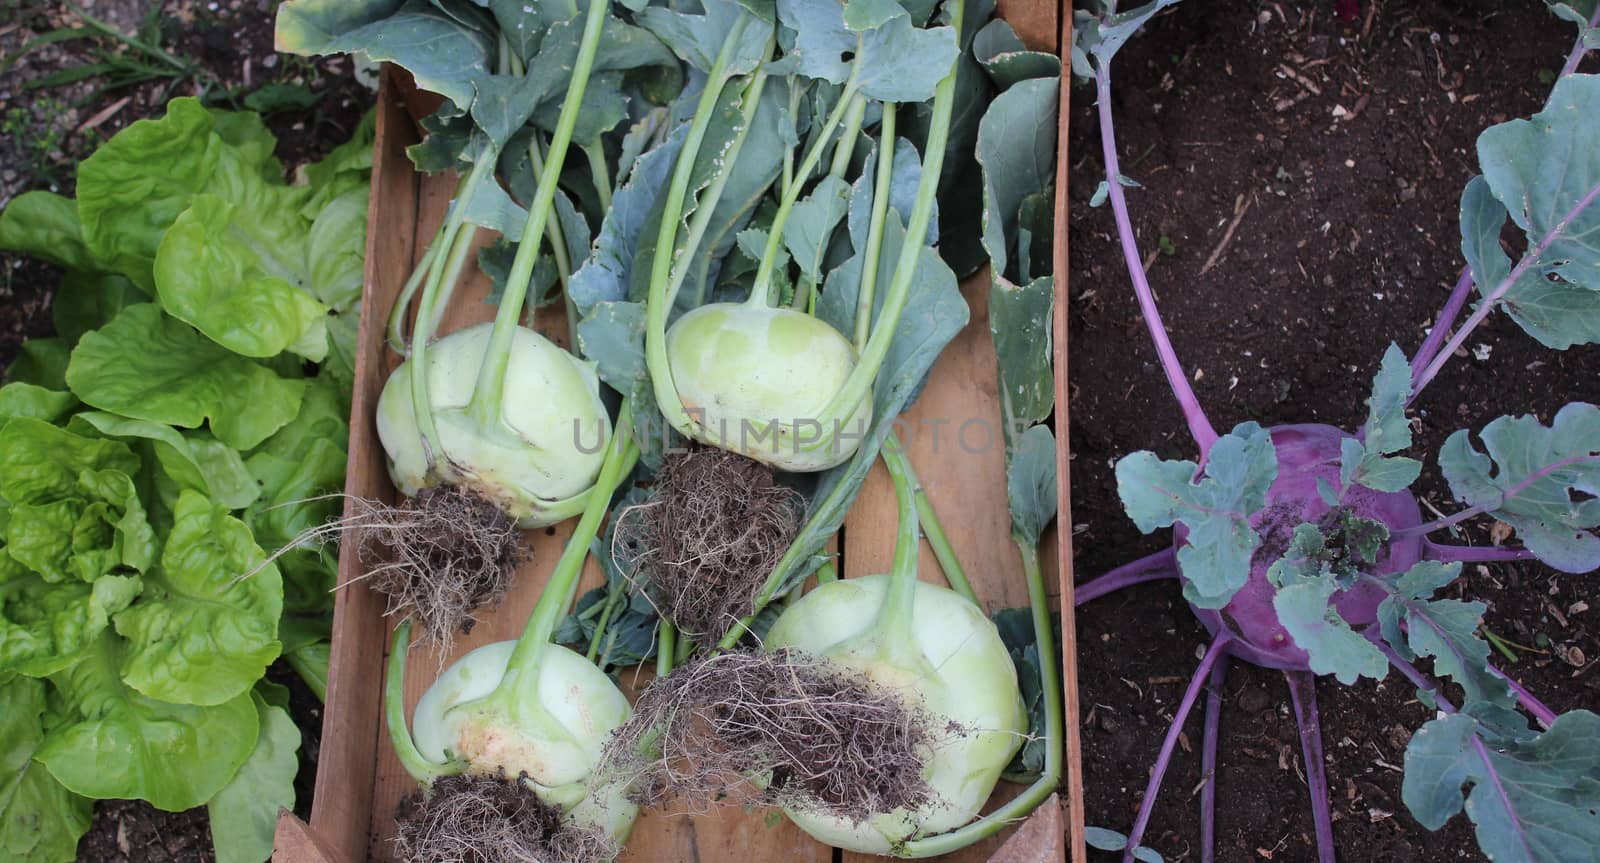 The picture shows cabbage turnip in the garden